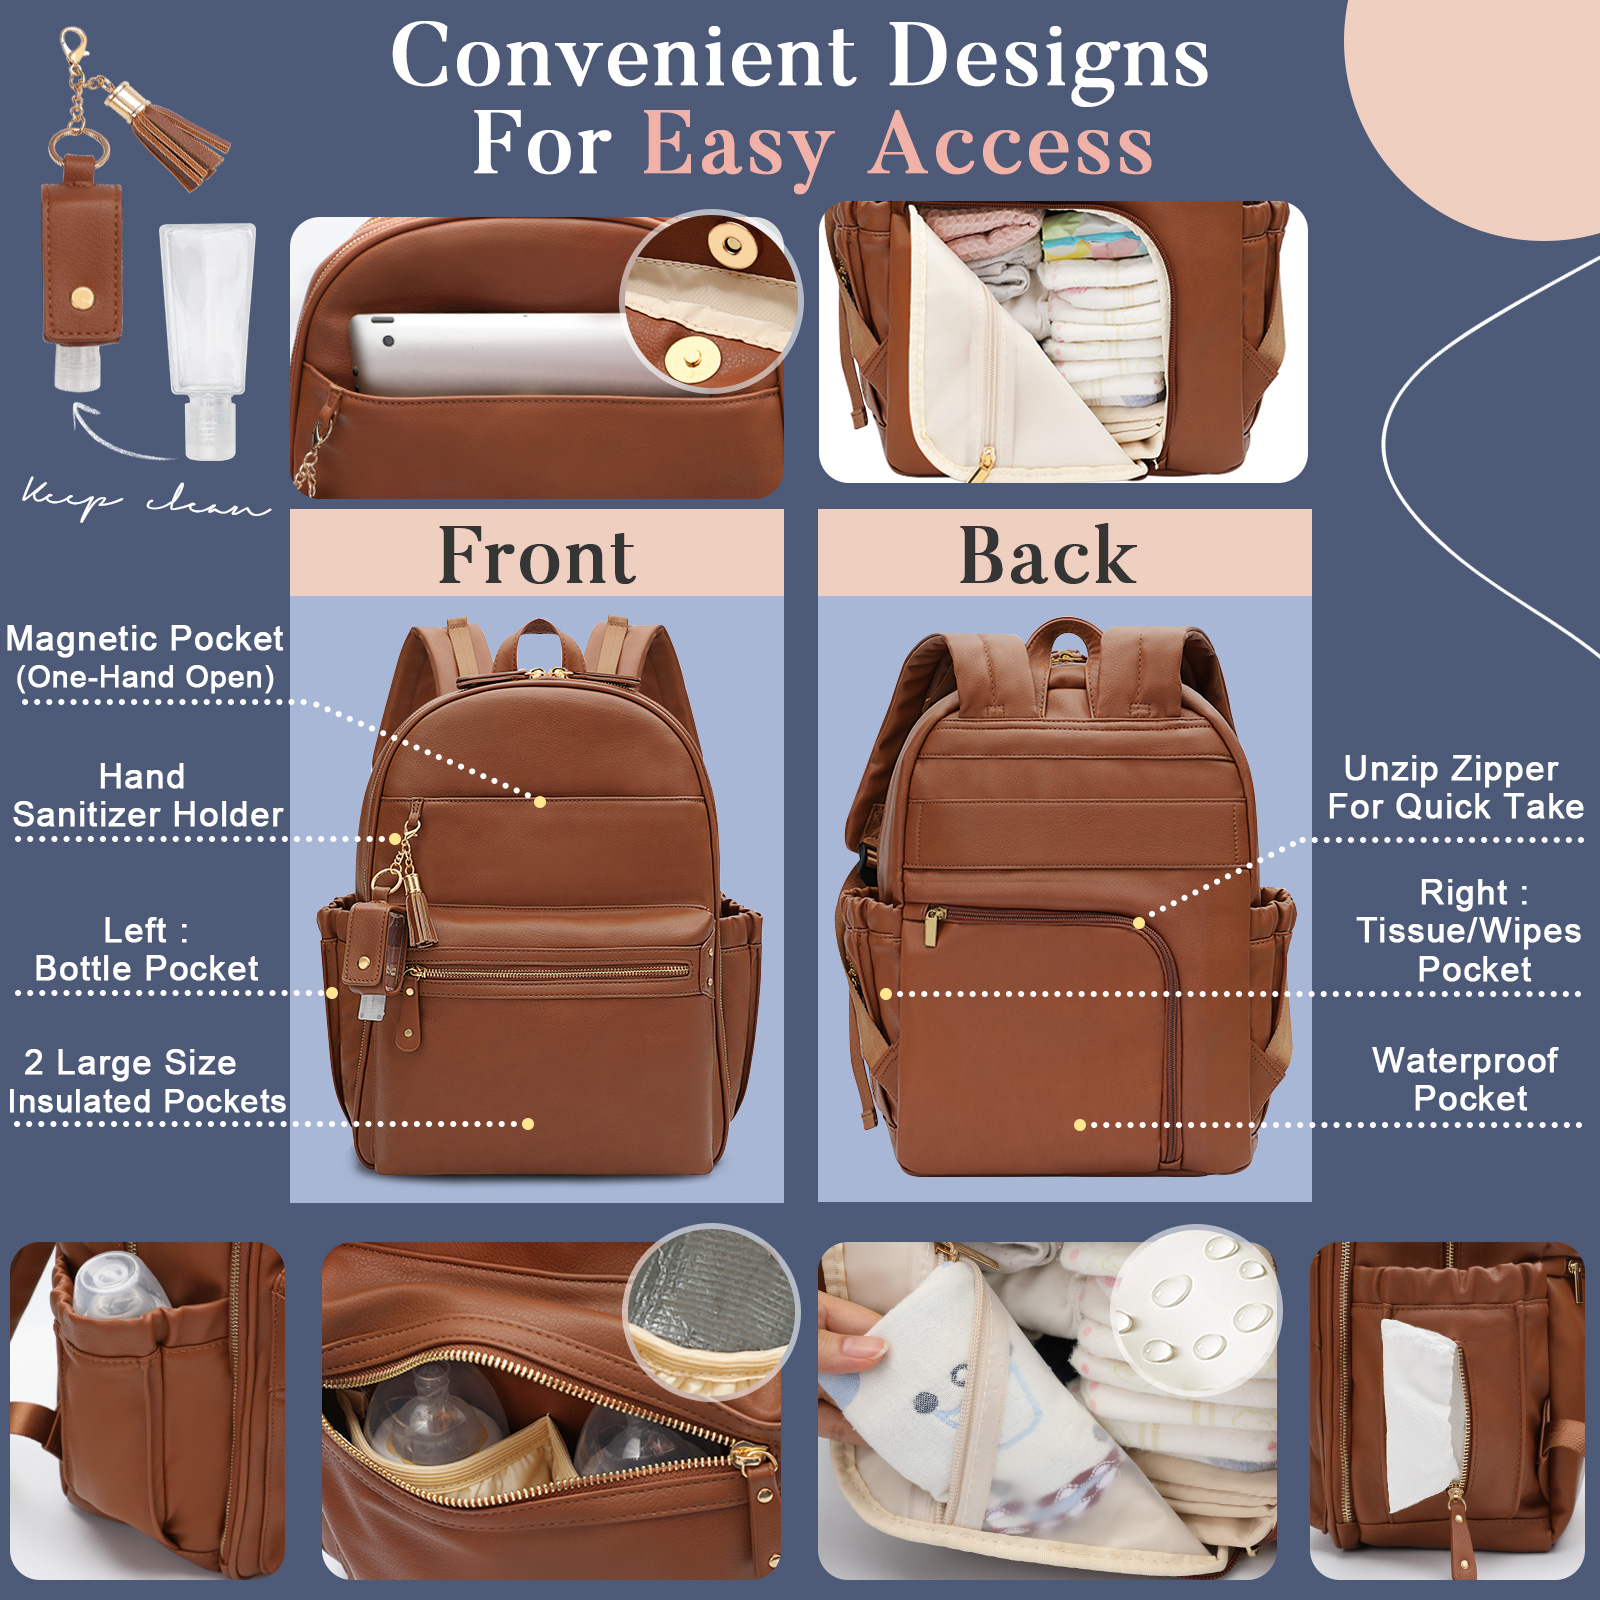 Lmbabter Removable Organizer Insert with Insulated Pocket, Diaper Bag with  6 Total Pockets, Handbag …See more Lmbabter Removable Organizer Insert with